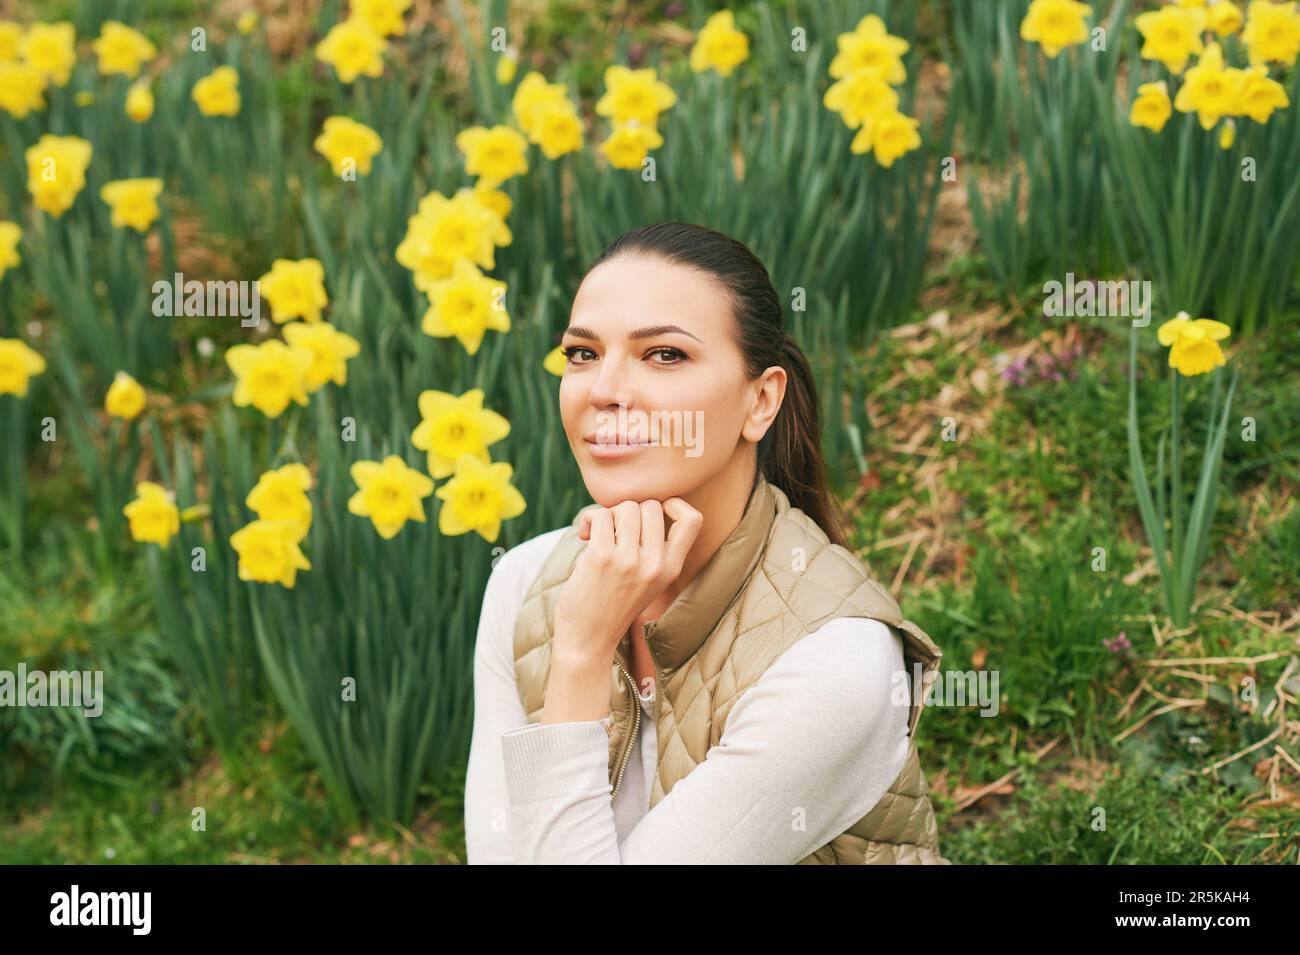 Spring portrait of young beautiful woman sitting in a field of blooming daffodils Stock Photo